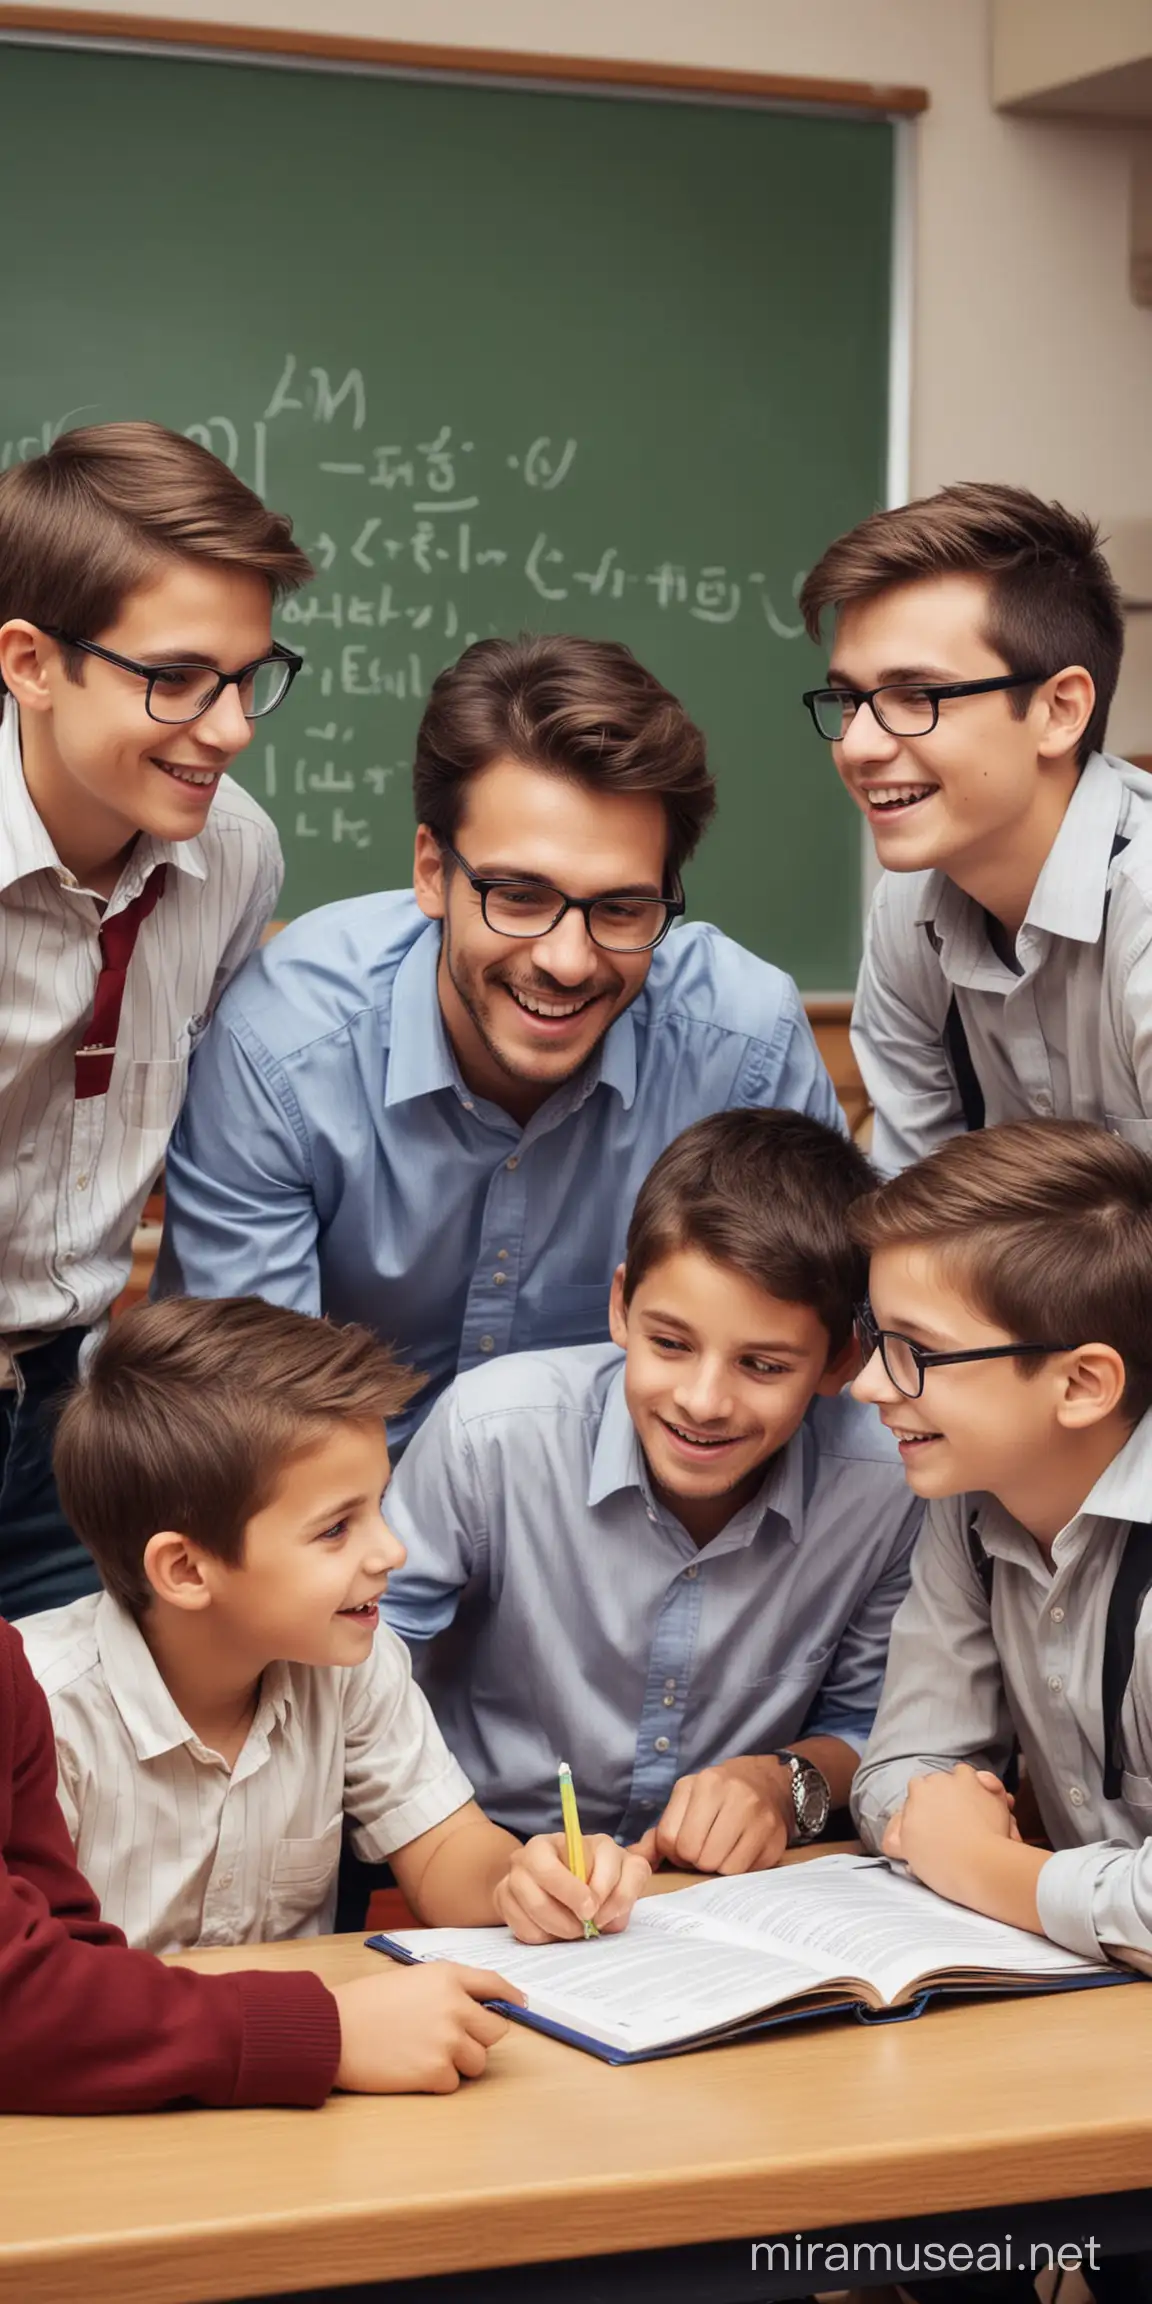 Modern Education Interactive Learning with Generation Z Boys and Teacher